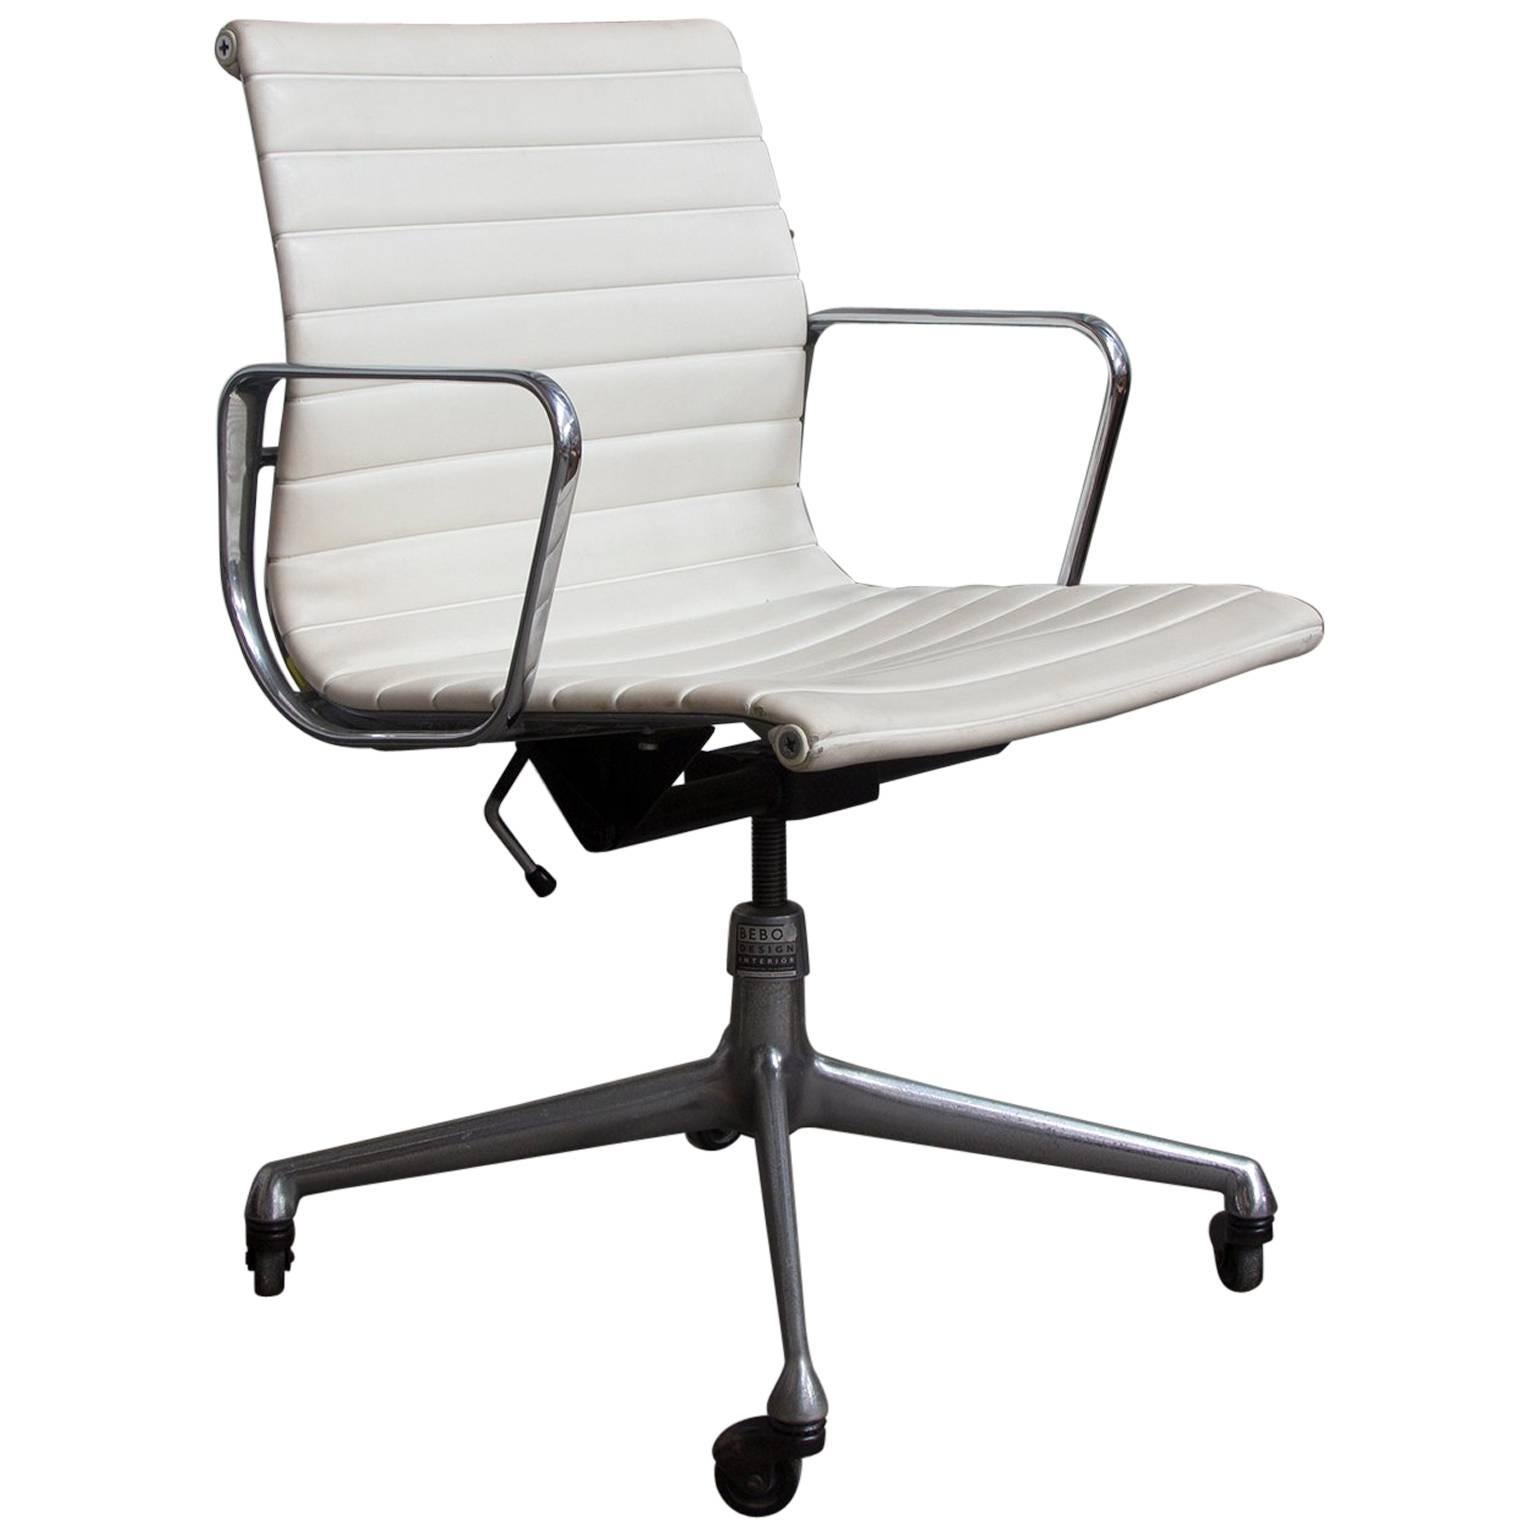 1958 Ray and Charles Eames, White Vinyl Adjust, Tilt, Office Chair Four Wheels